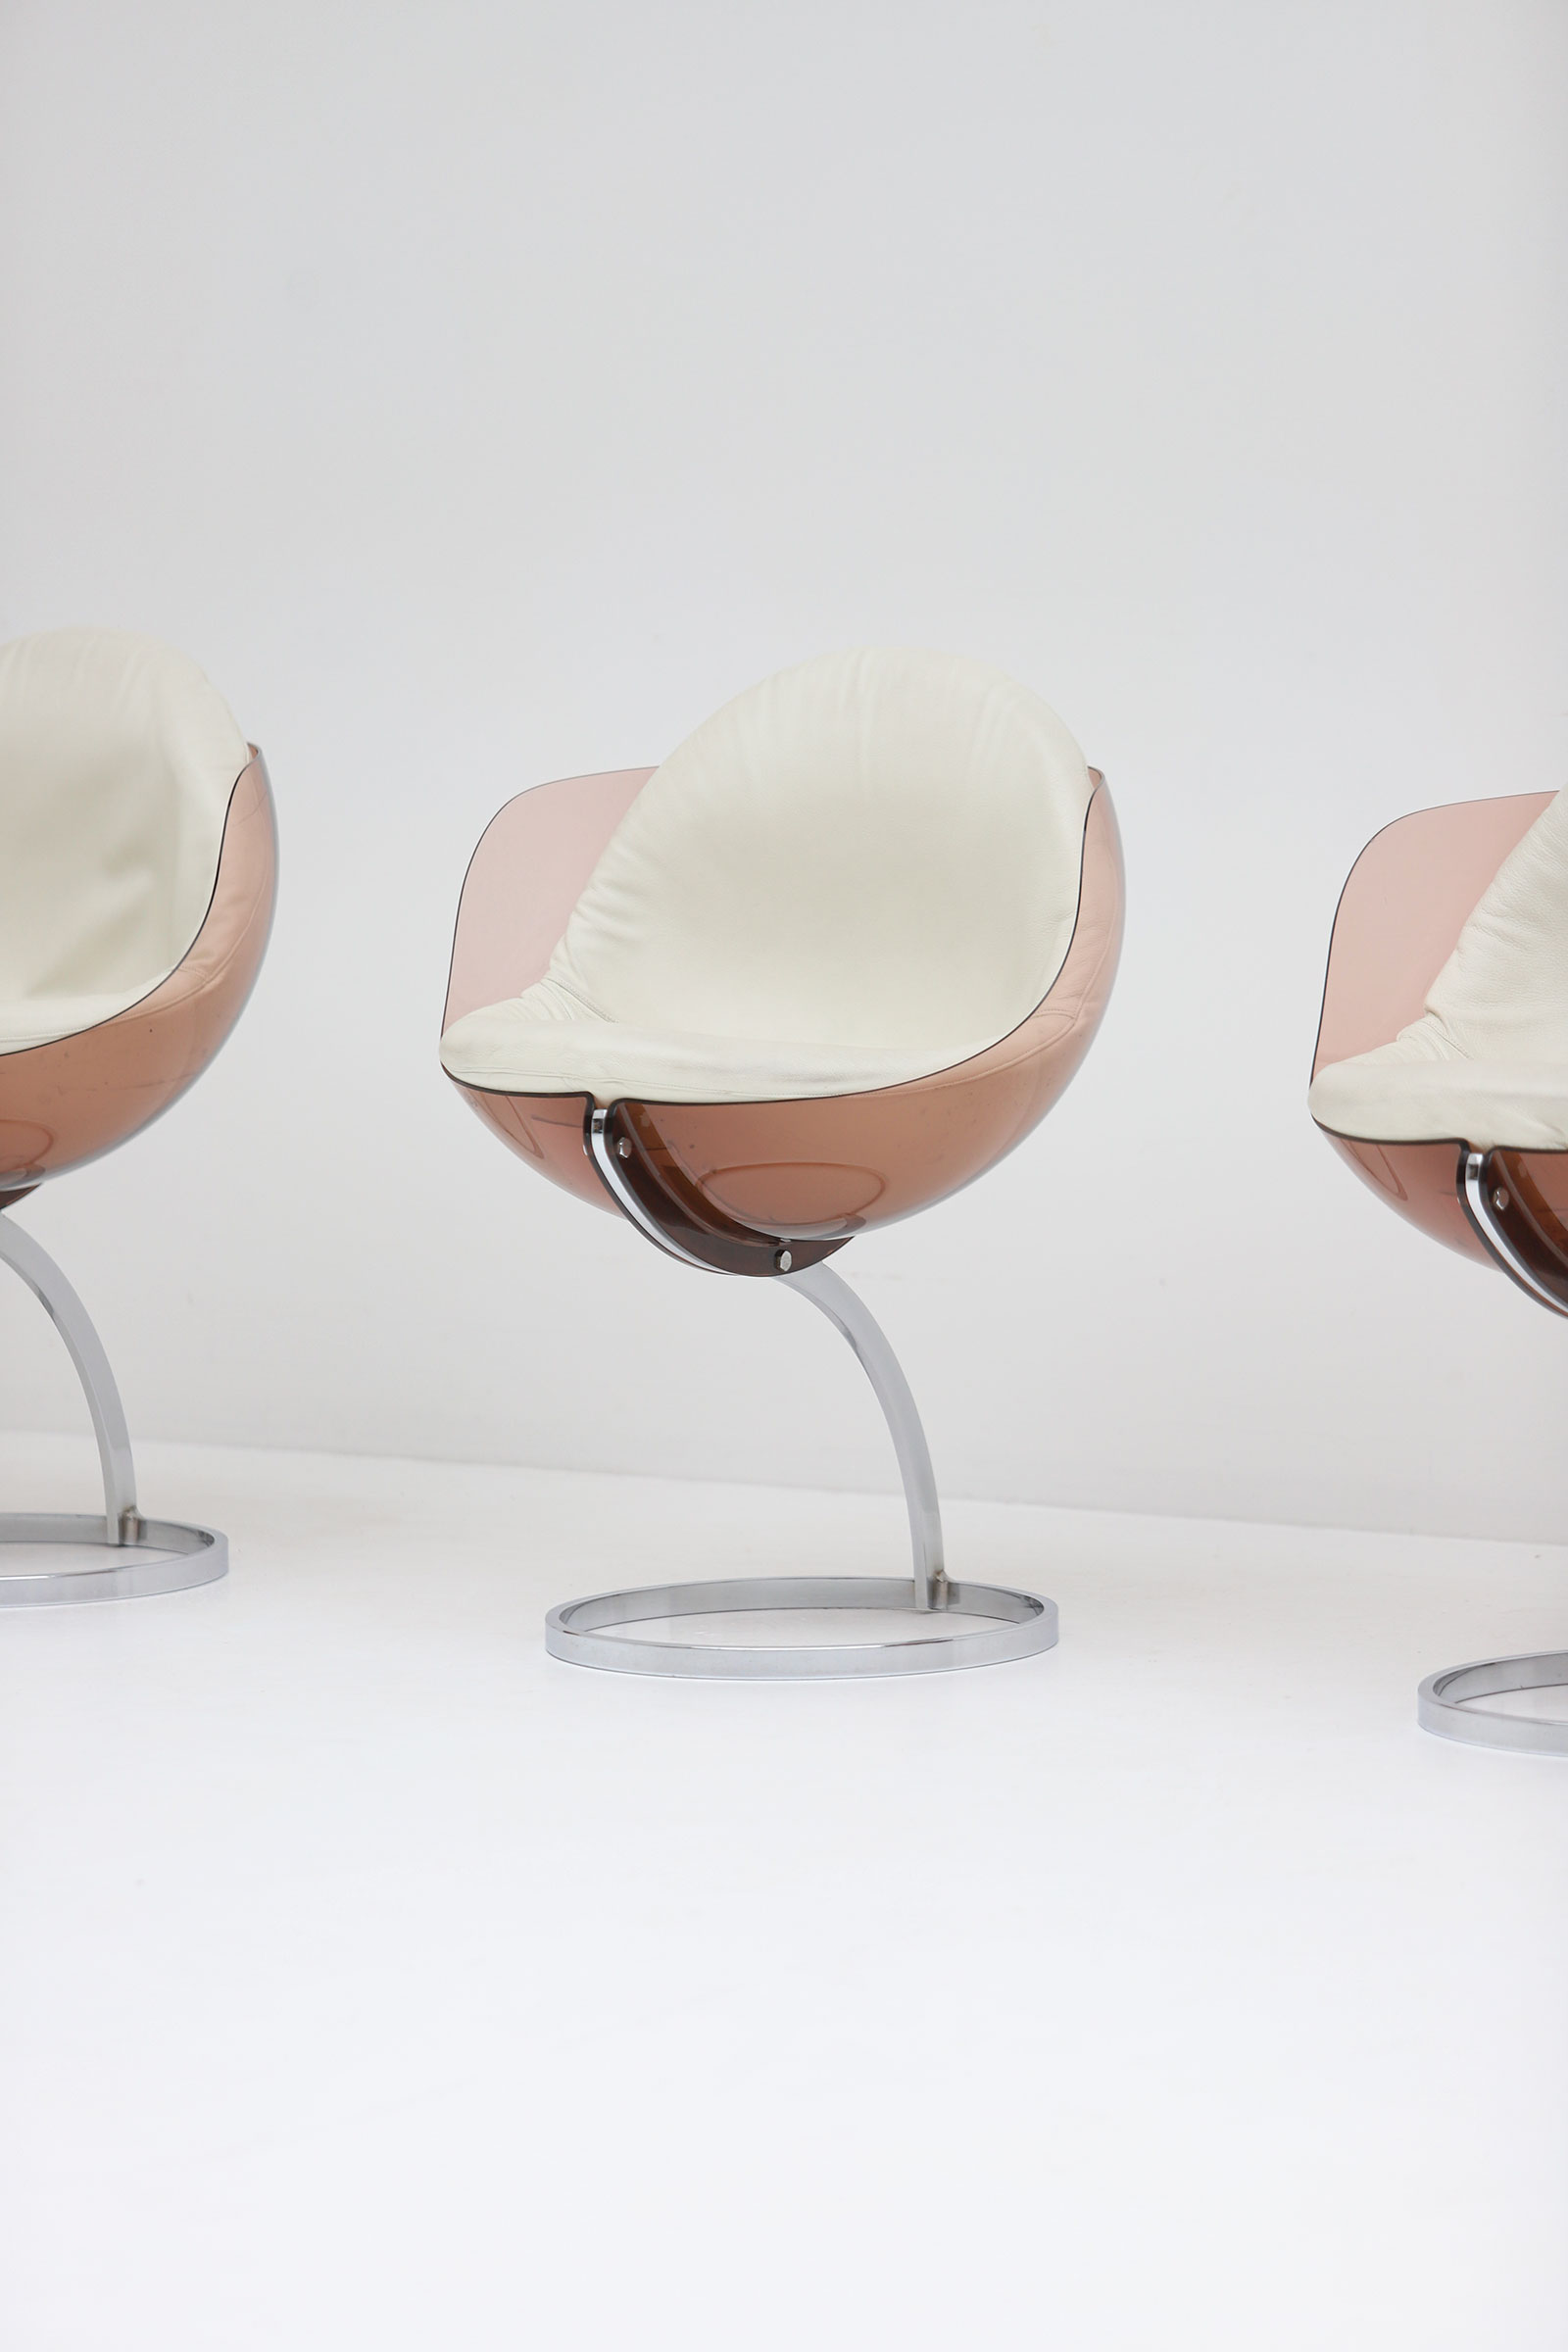 Sphere chair designed by Boris Tabacoffimage 3